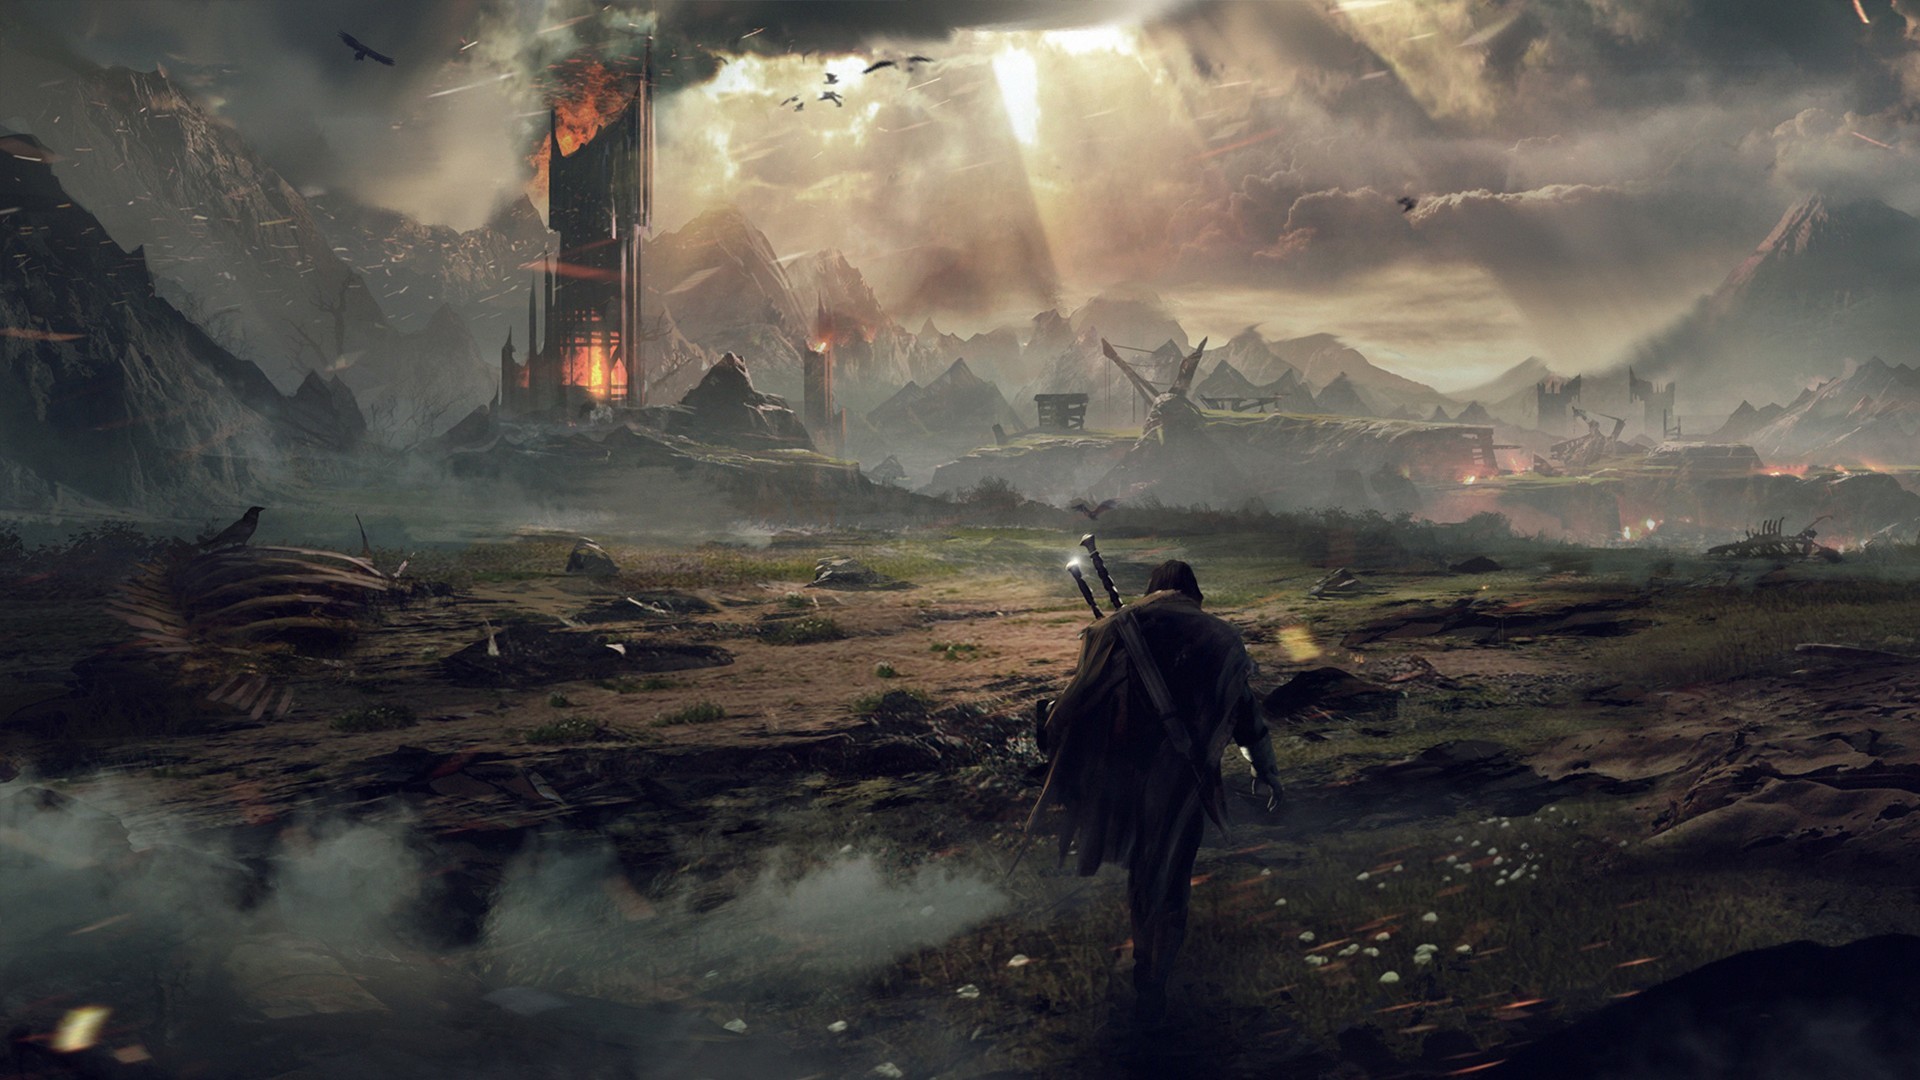 1920x1080 The Lord of the Rings Middle Earth: Shadows of Mordor HD wallpaper thumb